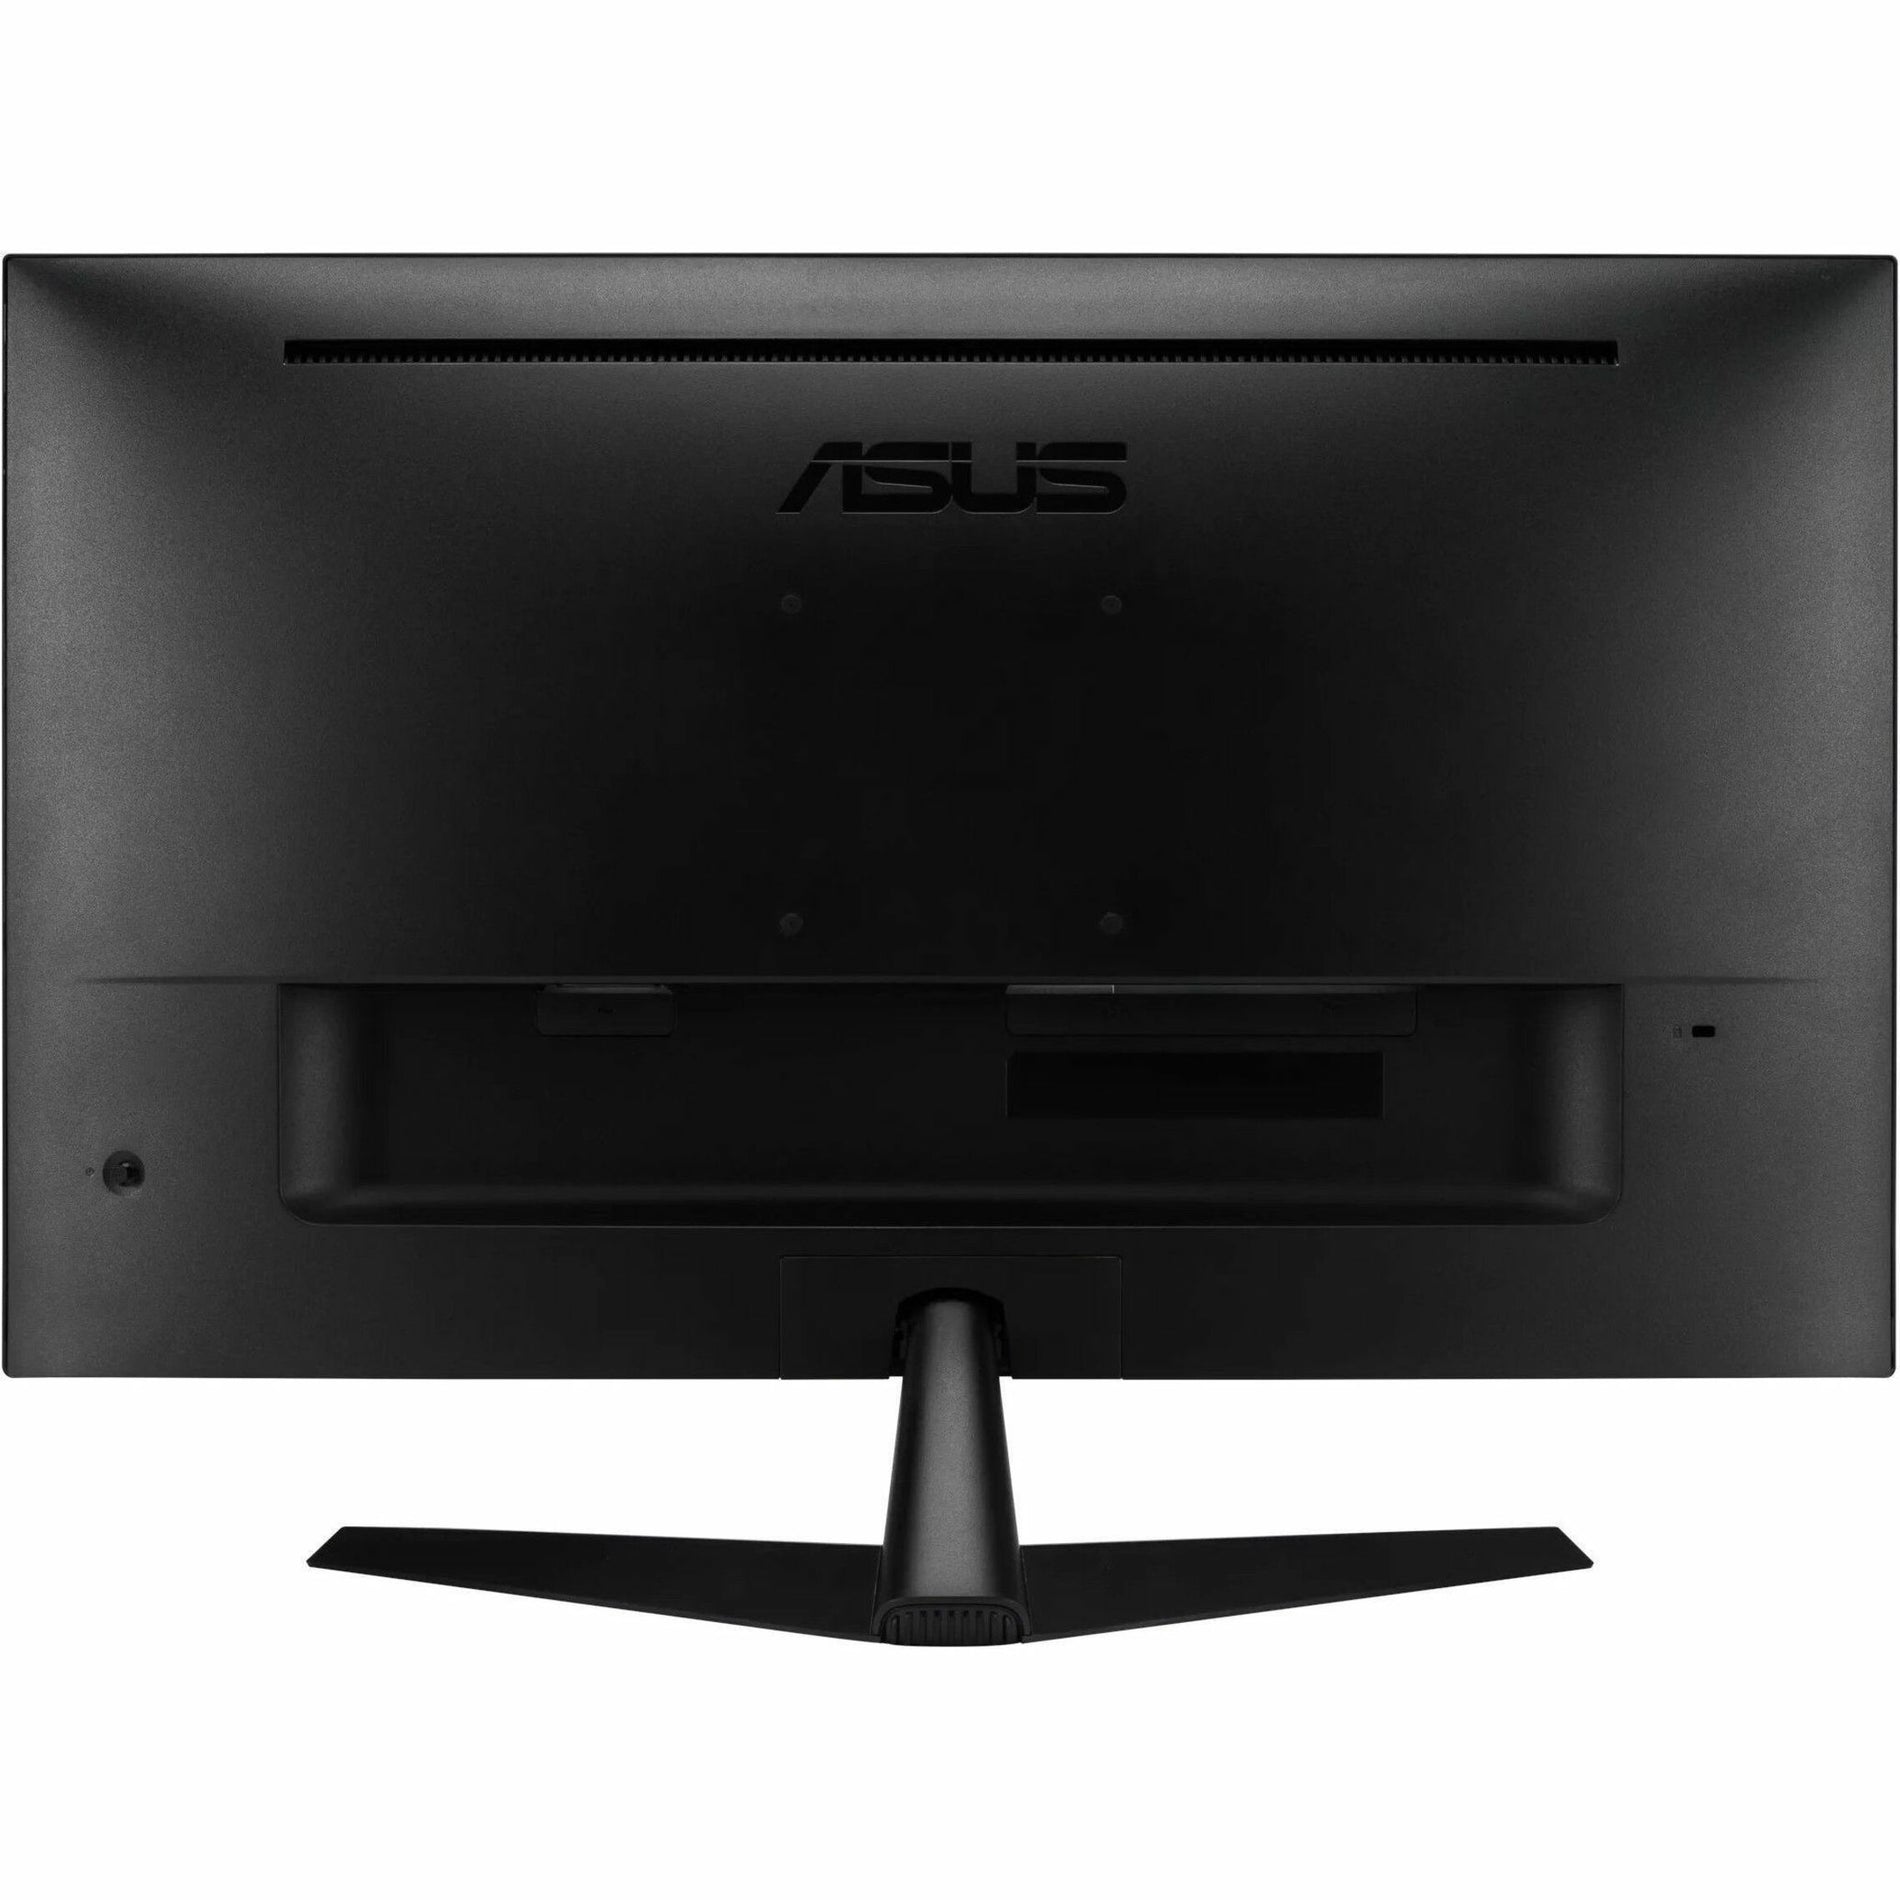 Asus VY279HF Gaming LED Monitor 27", Full HD, Adaptive Sync, TCO Certified, EPEAT Bronze